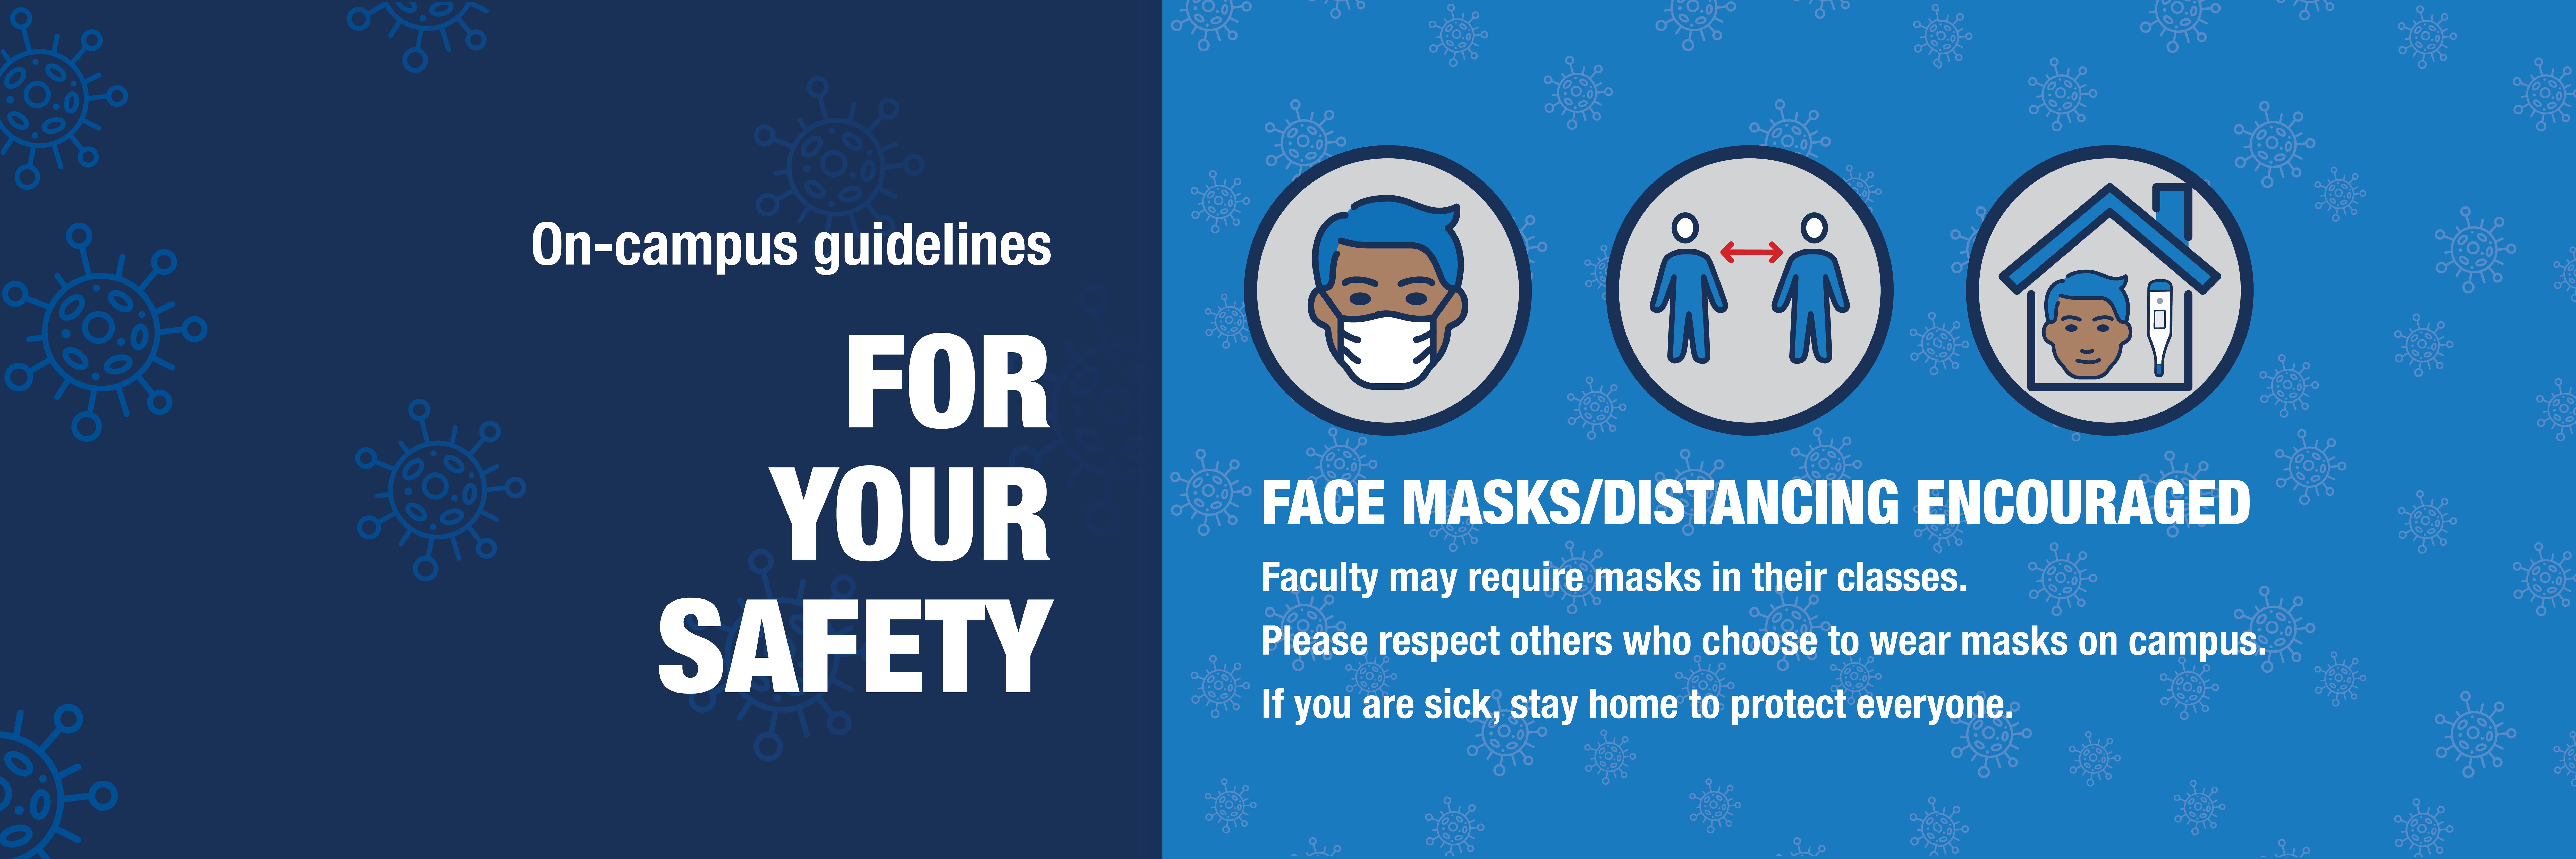 Face coverings are encouraged but not required. Please respect others' decisions and be safe.